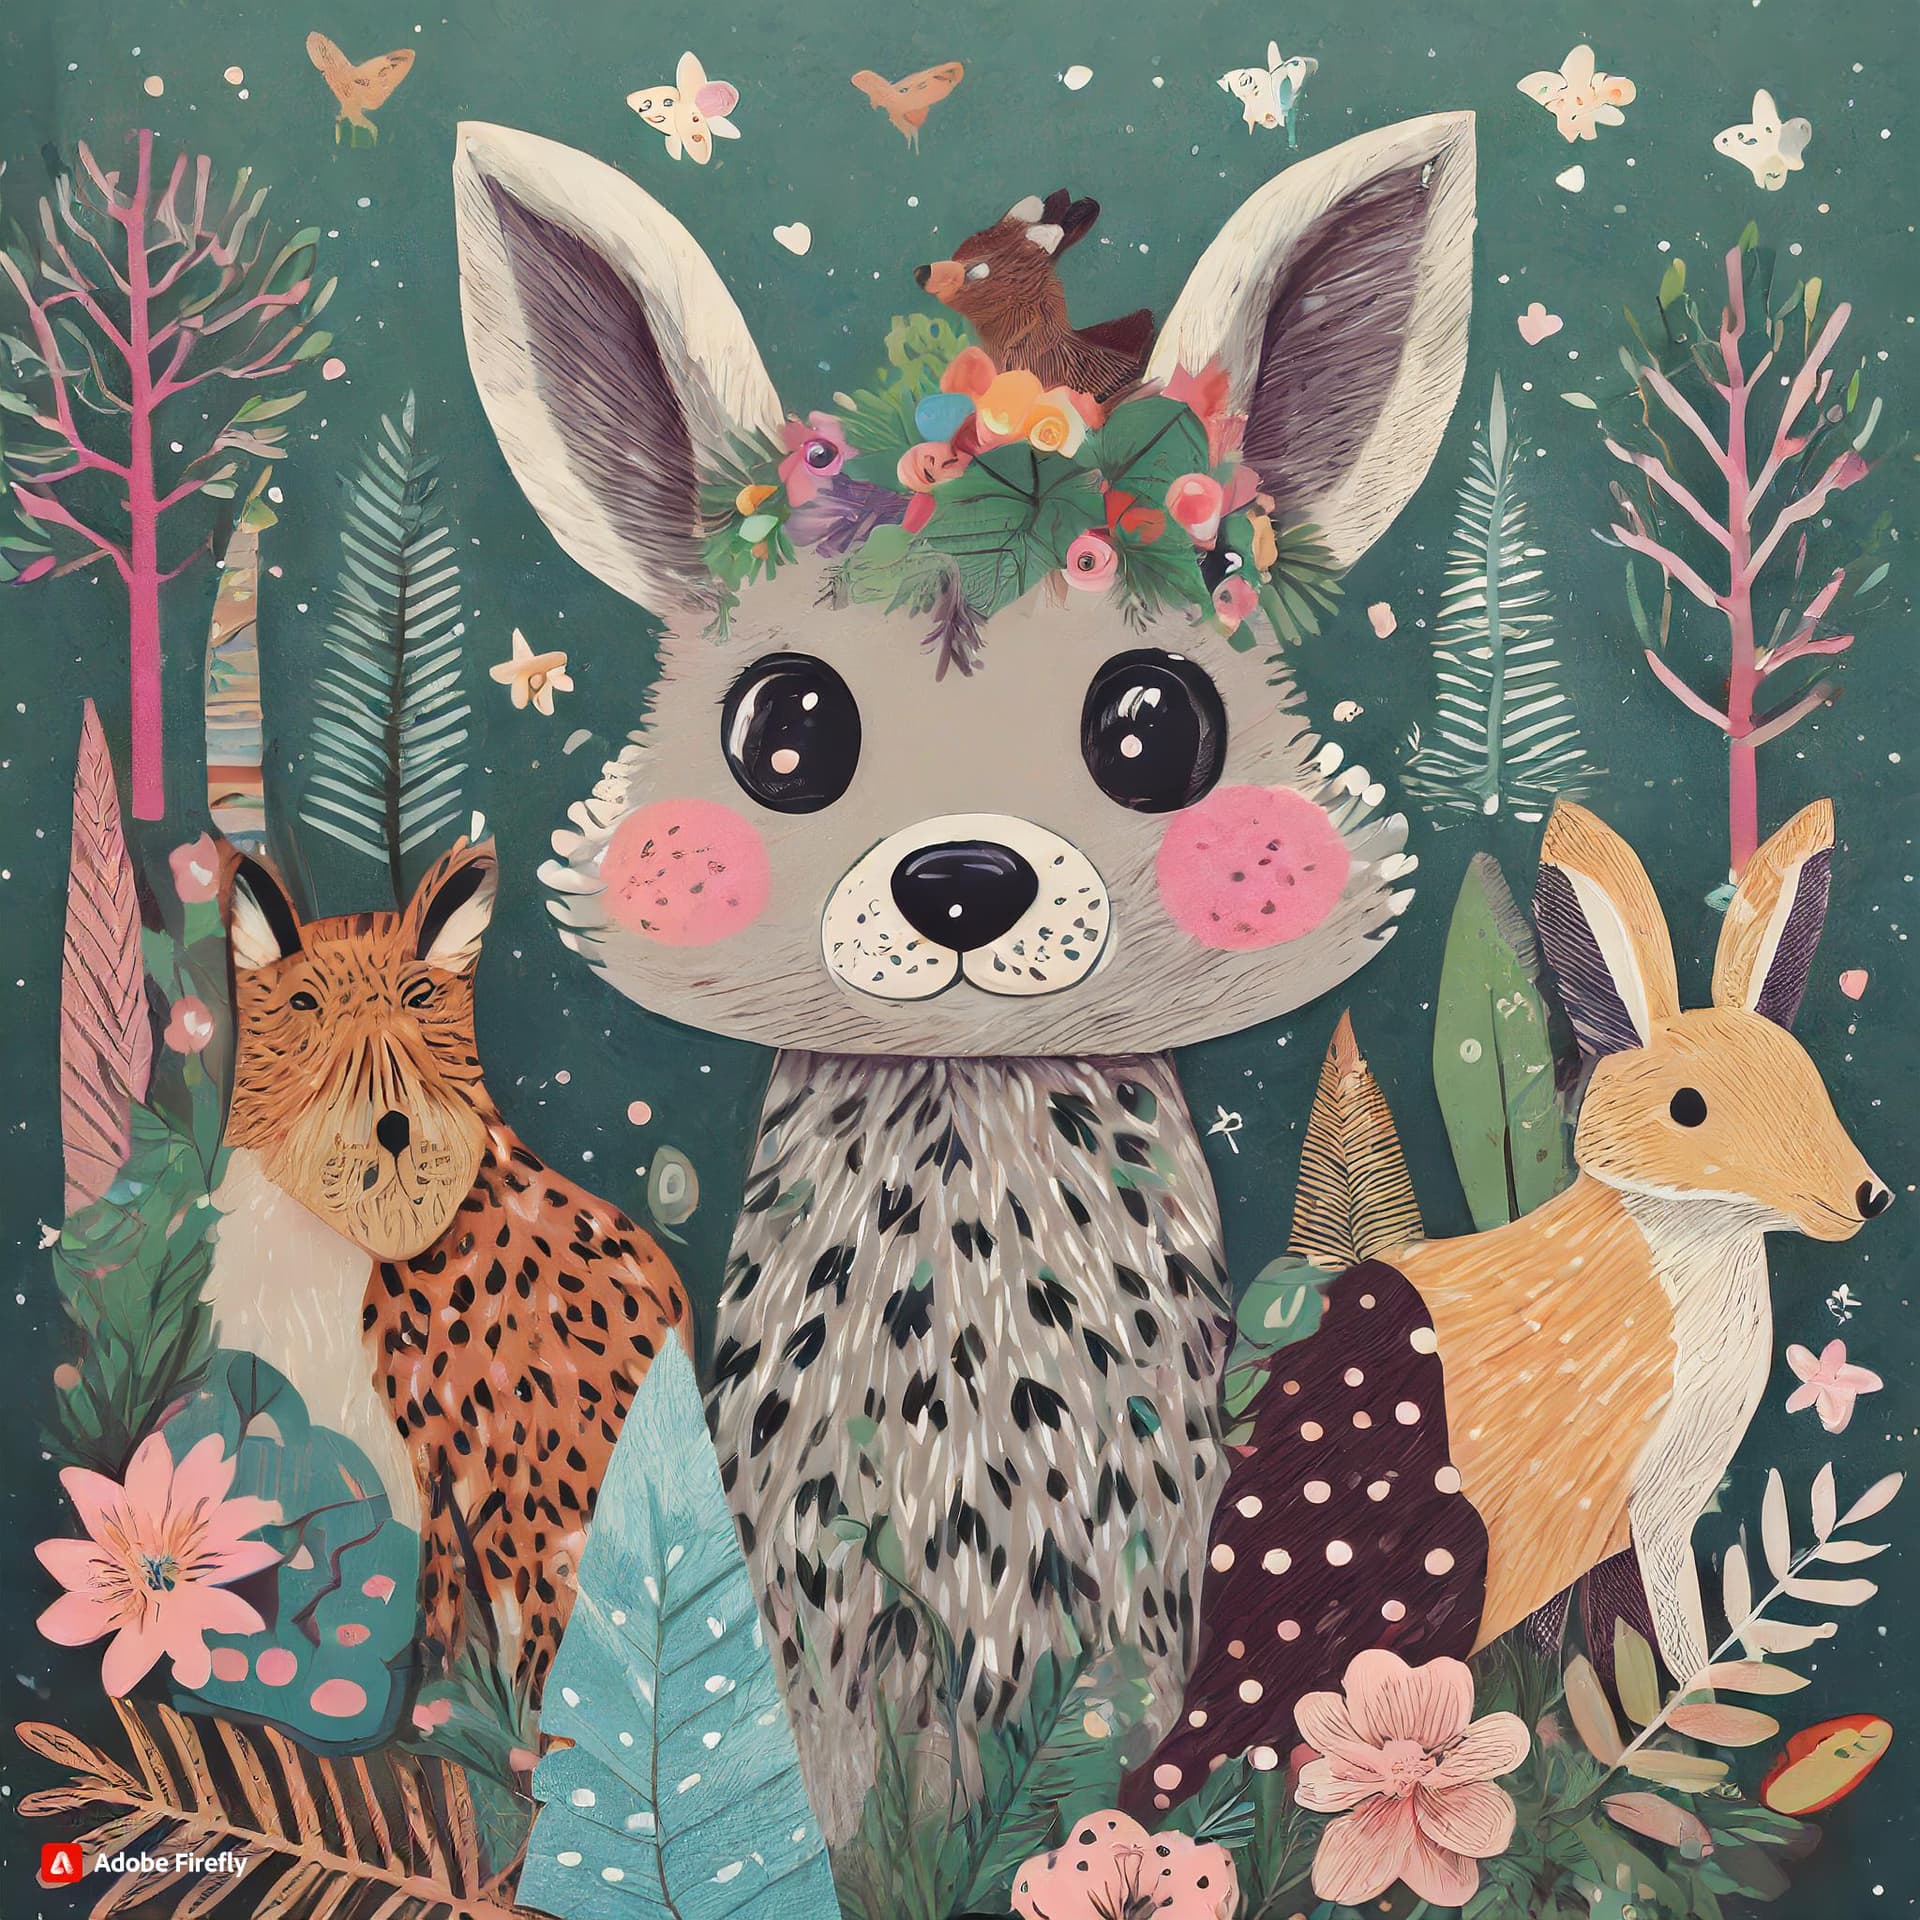 Firefly a profile picture that has an 80s vibe with cute woodland animals 48999